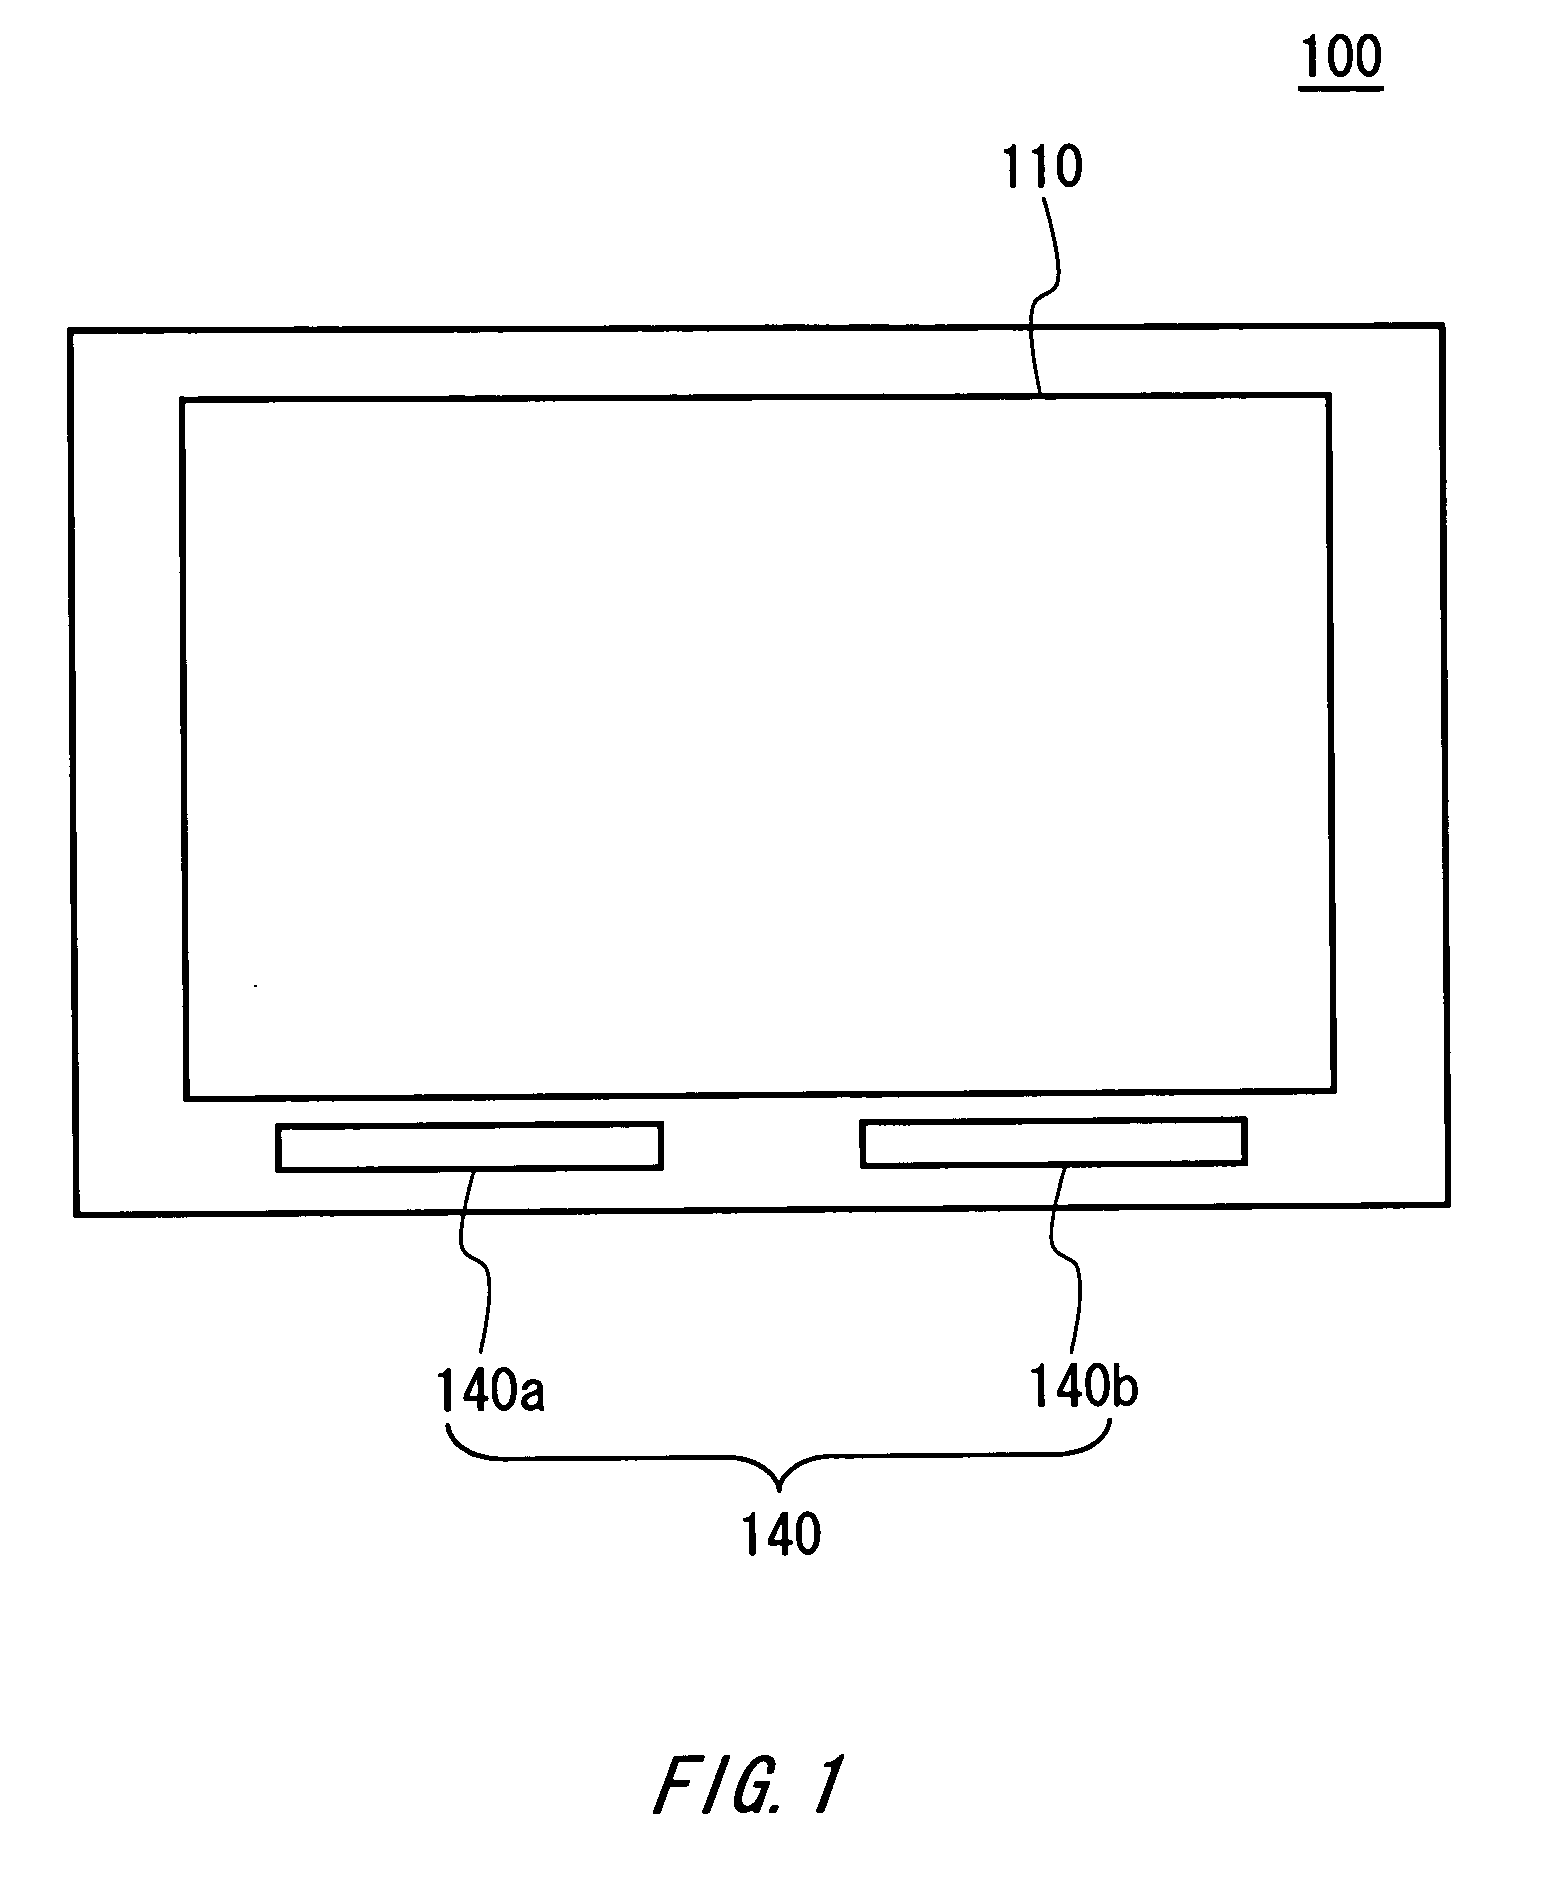 Displaying apparatus, a displaying method, and a machine readable medium storing thereon a computer program